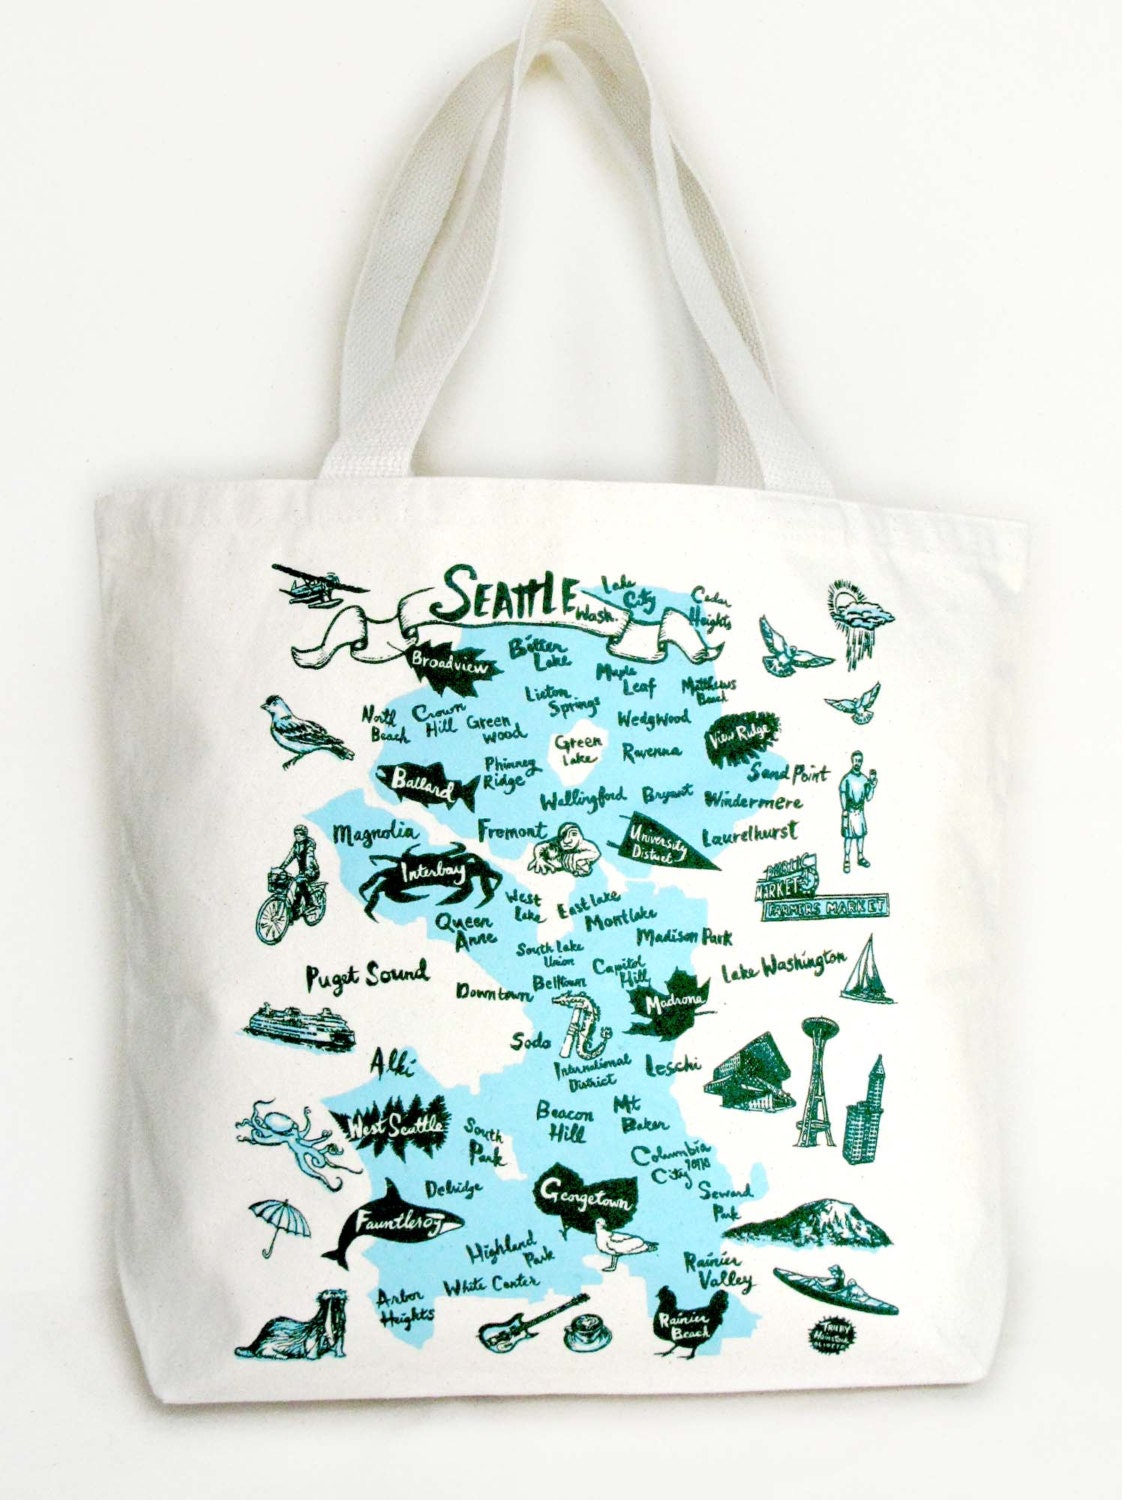 Seattle Neighborhood Screen Print Canvas Tote Bag by OLIOTTO